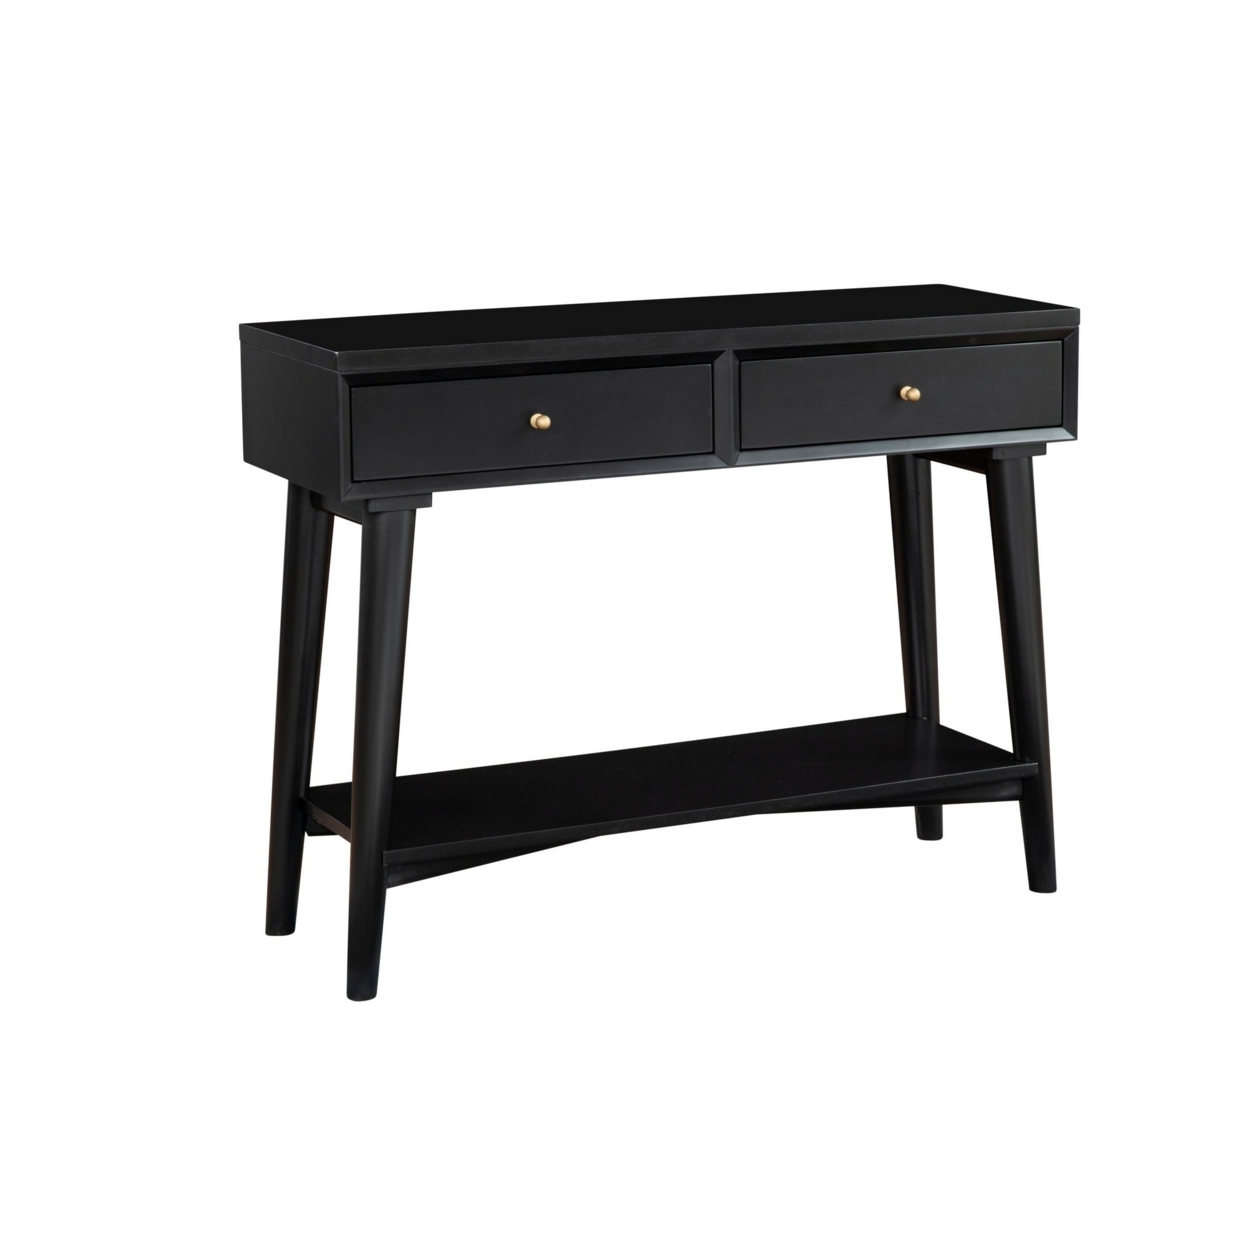 Console Table With 2 Drawers And Angled Legs, Black- Saltoro Sherpi